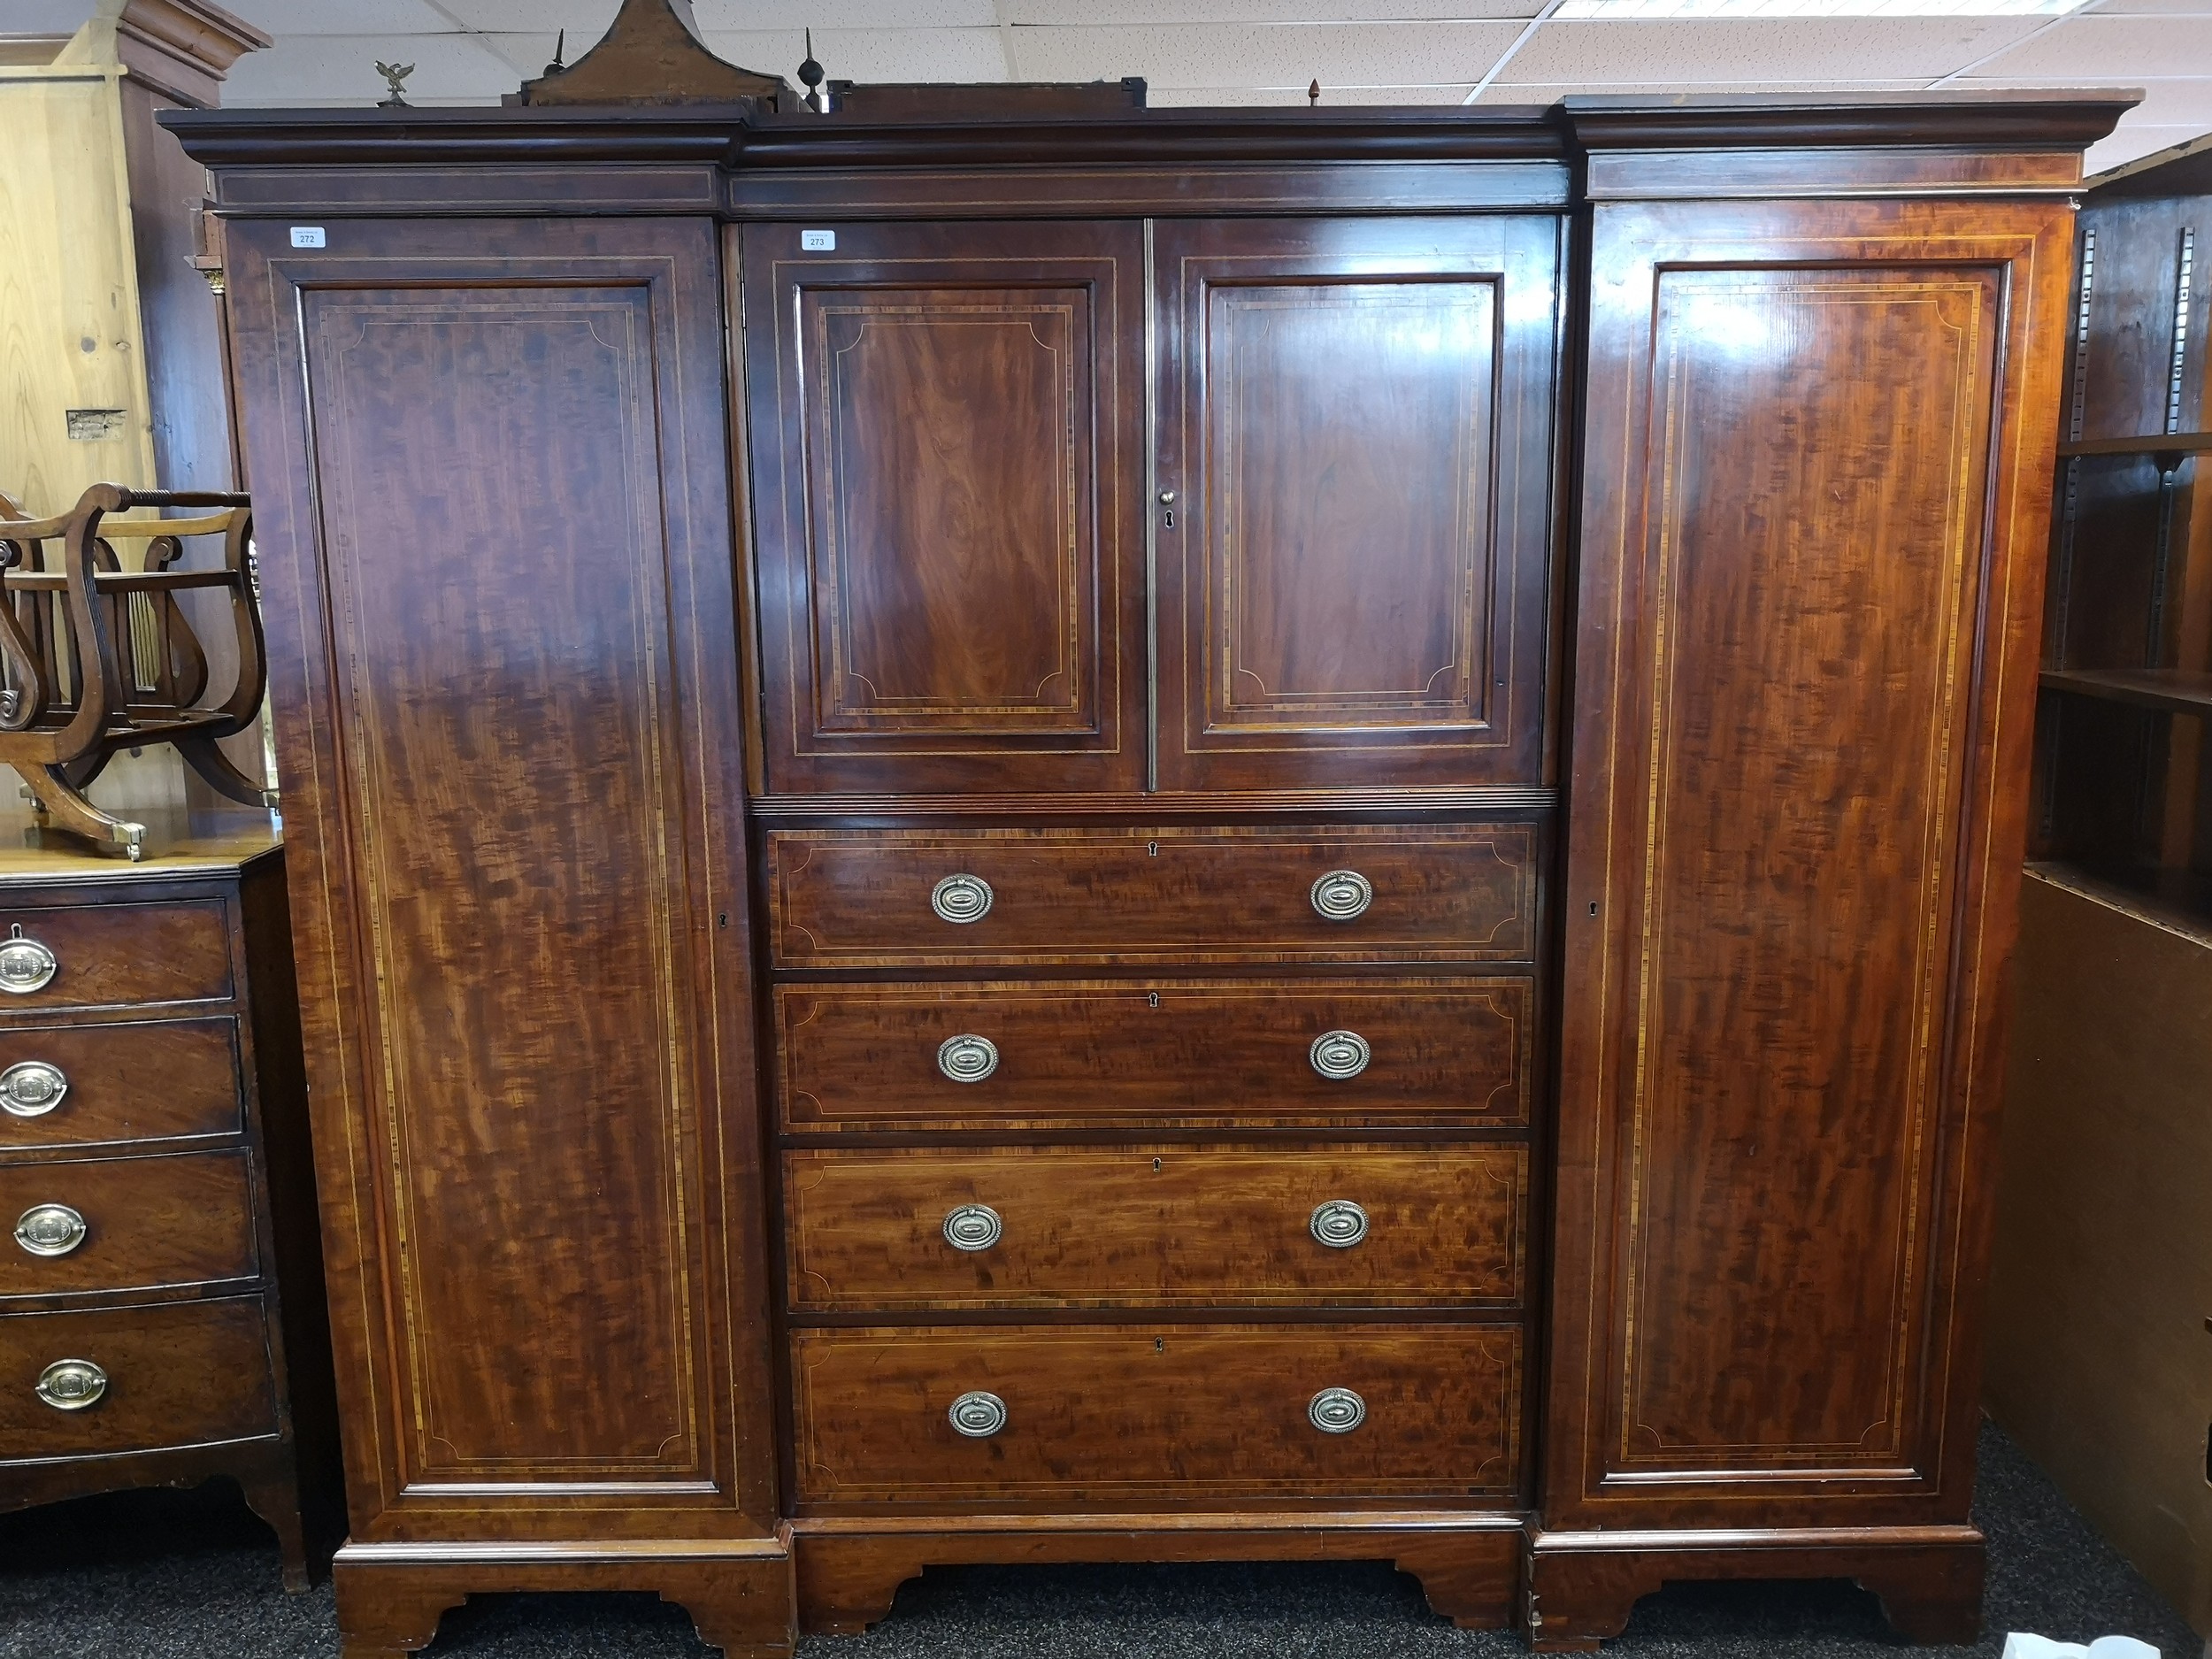 19th century mahogany compactum wardrobe, inlay detail throughout, central pair of doors above